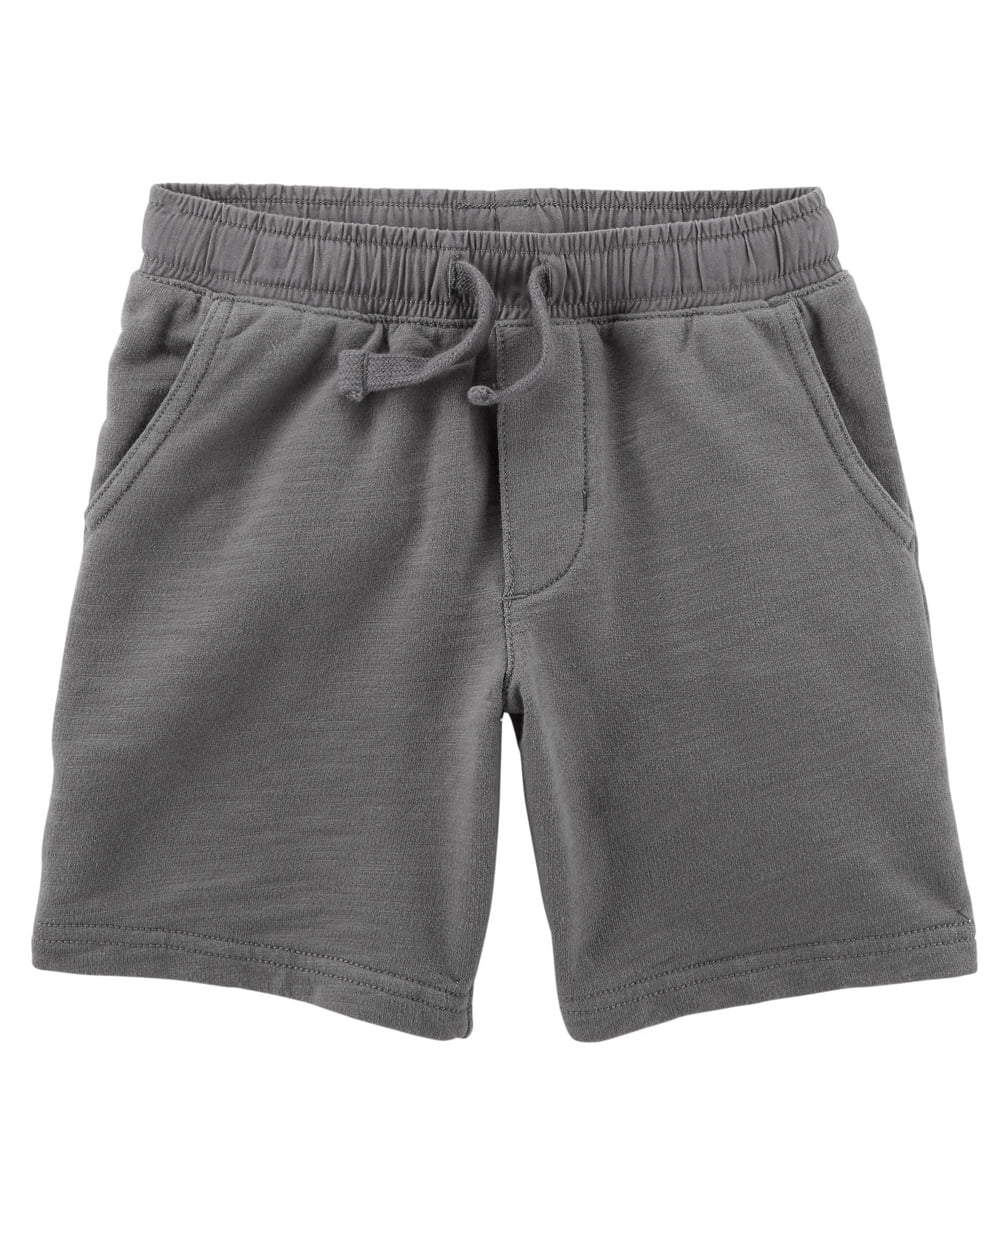 Carter's Boys TWO Pair of Pull-On Mesh Athletic Shorts NWT one blue one gray gym 